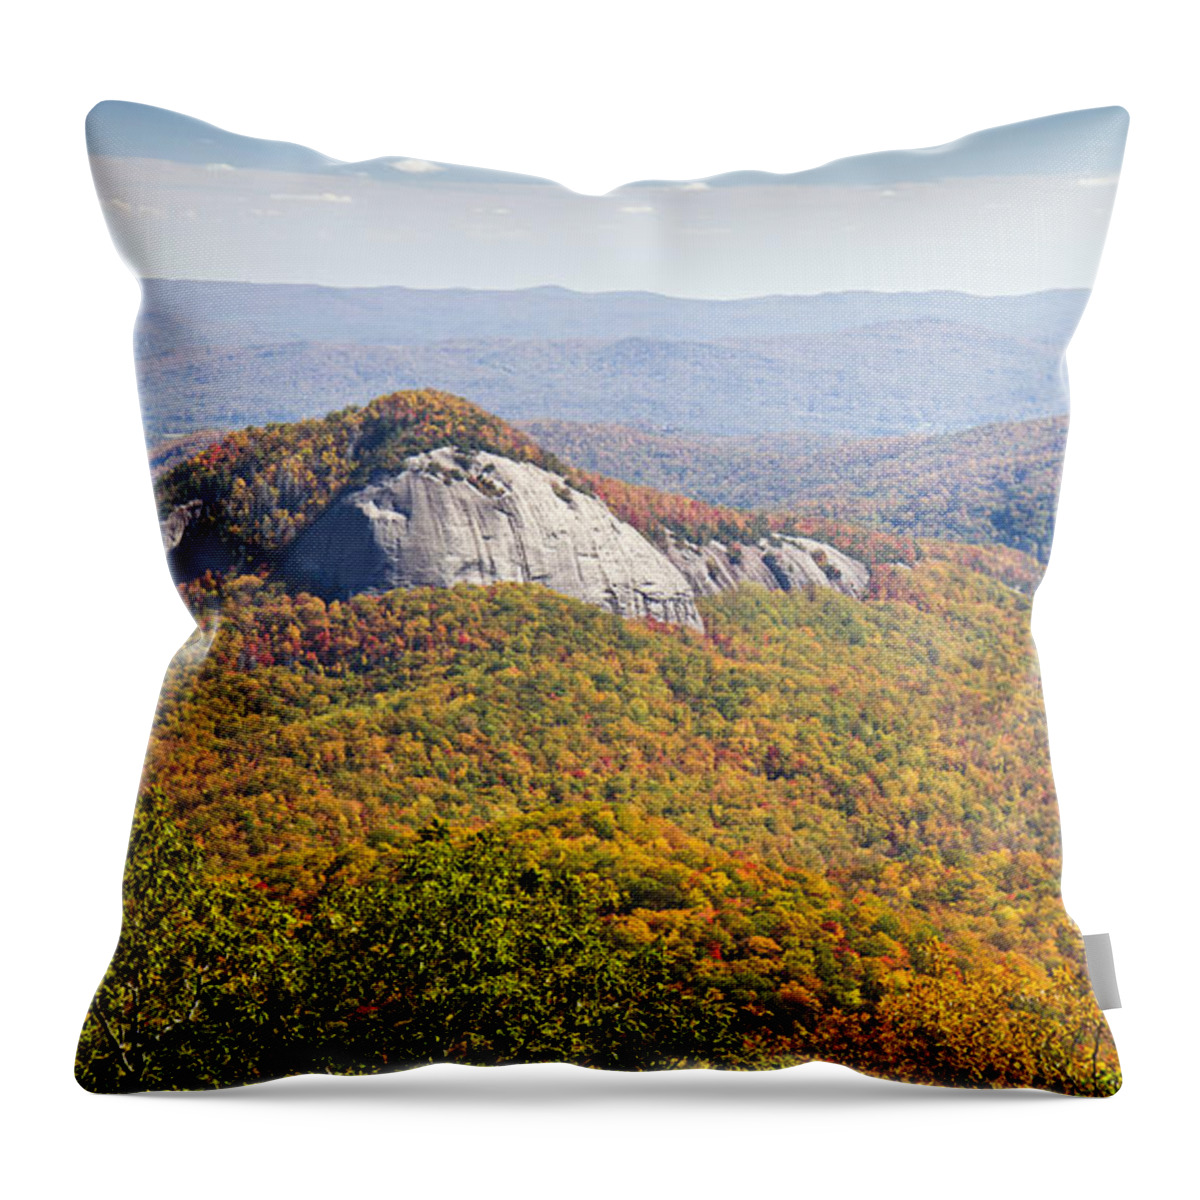 Autumn Throw Pillow featuring the photograph Looking Glass Rock Blue Ridge Parkway by Pierre Leclerc Photography